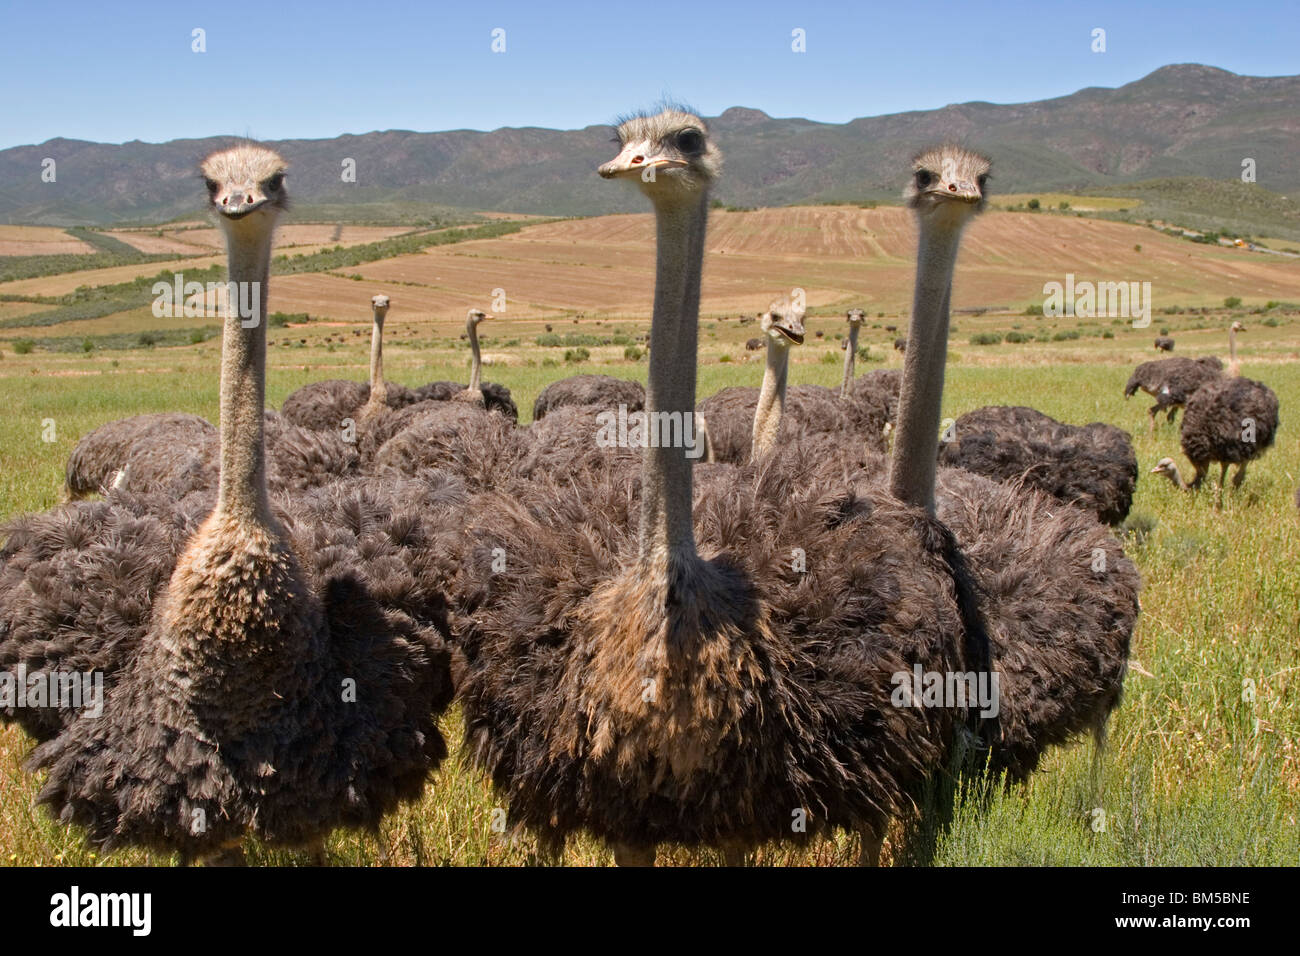 Ostriches on a field, South Africa / Struthio camelus Stock Photo